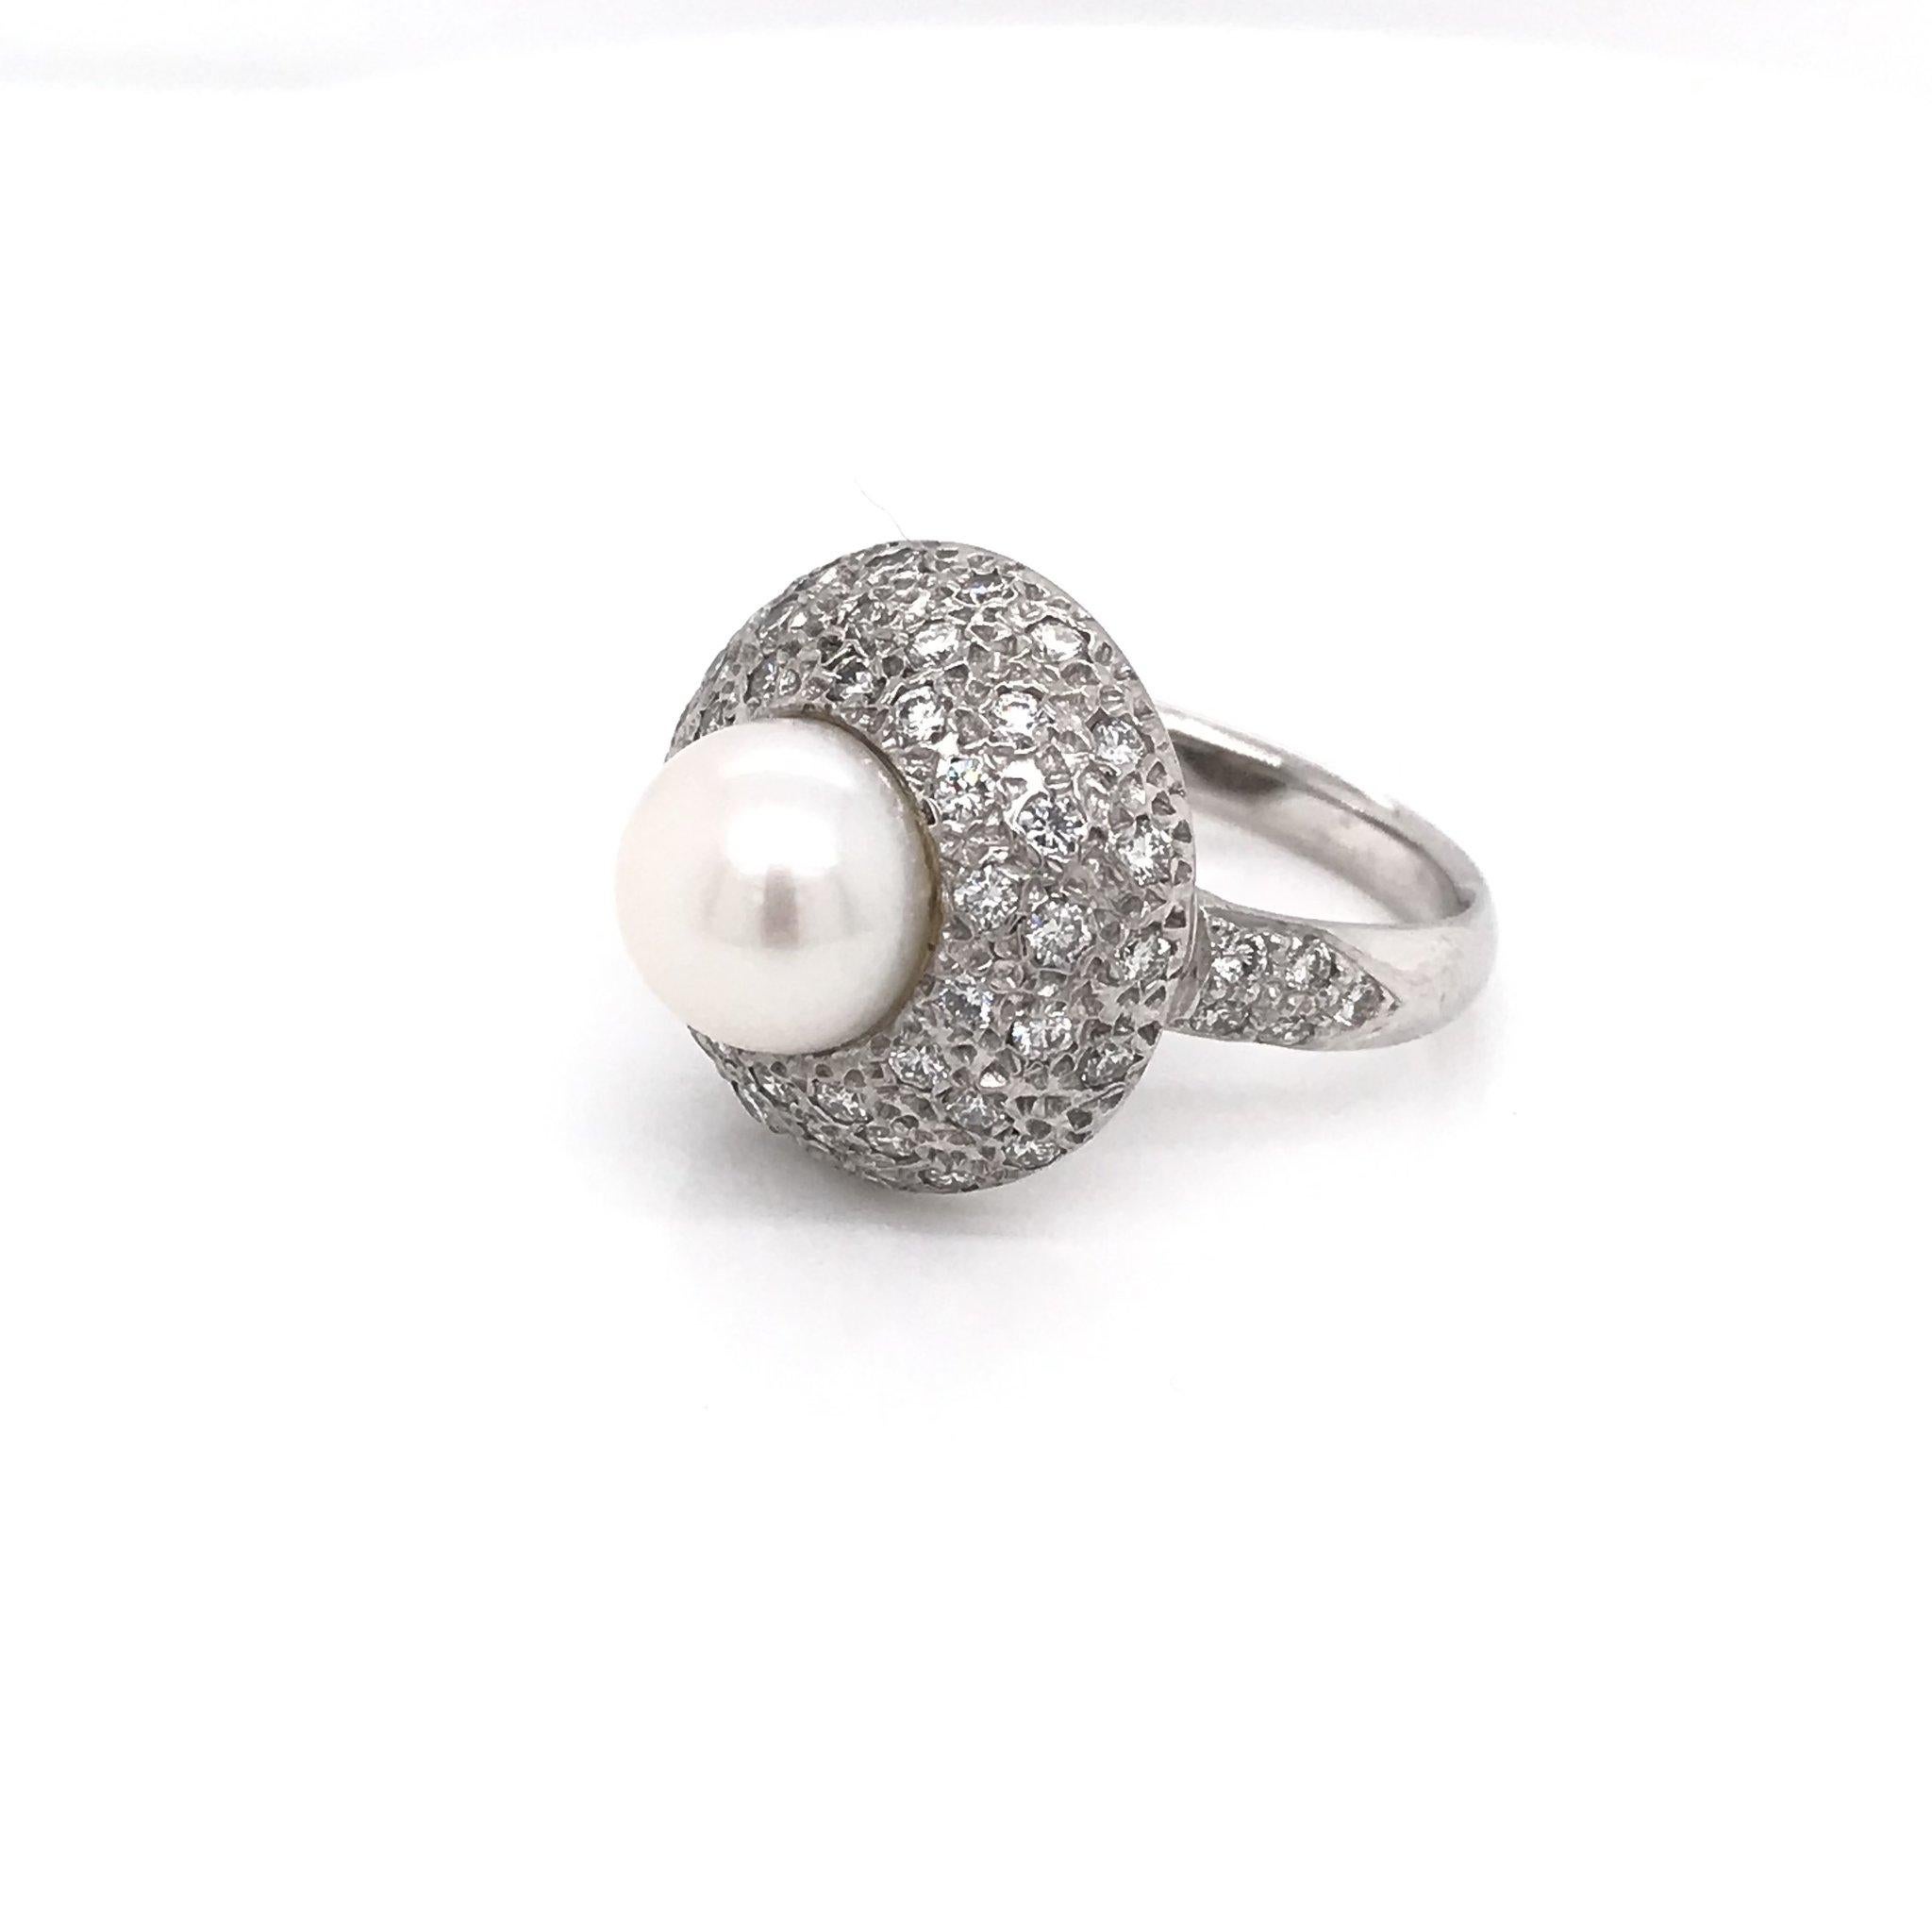 This is an estate piece. This contemporary diamond and pearl ring is 14k white gold and features approximately 1 carat of diamonds combined total weight. The center pearl is saltwater cultured and measures approximately 8.5 mm. The pearl has a good